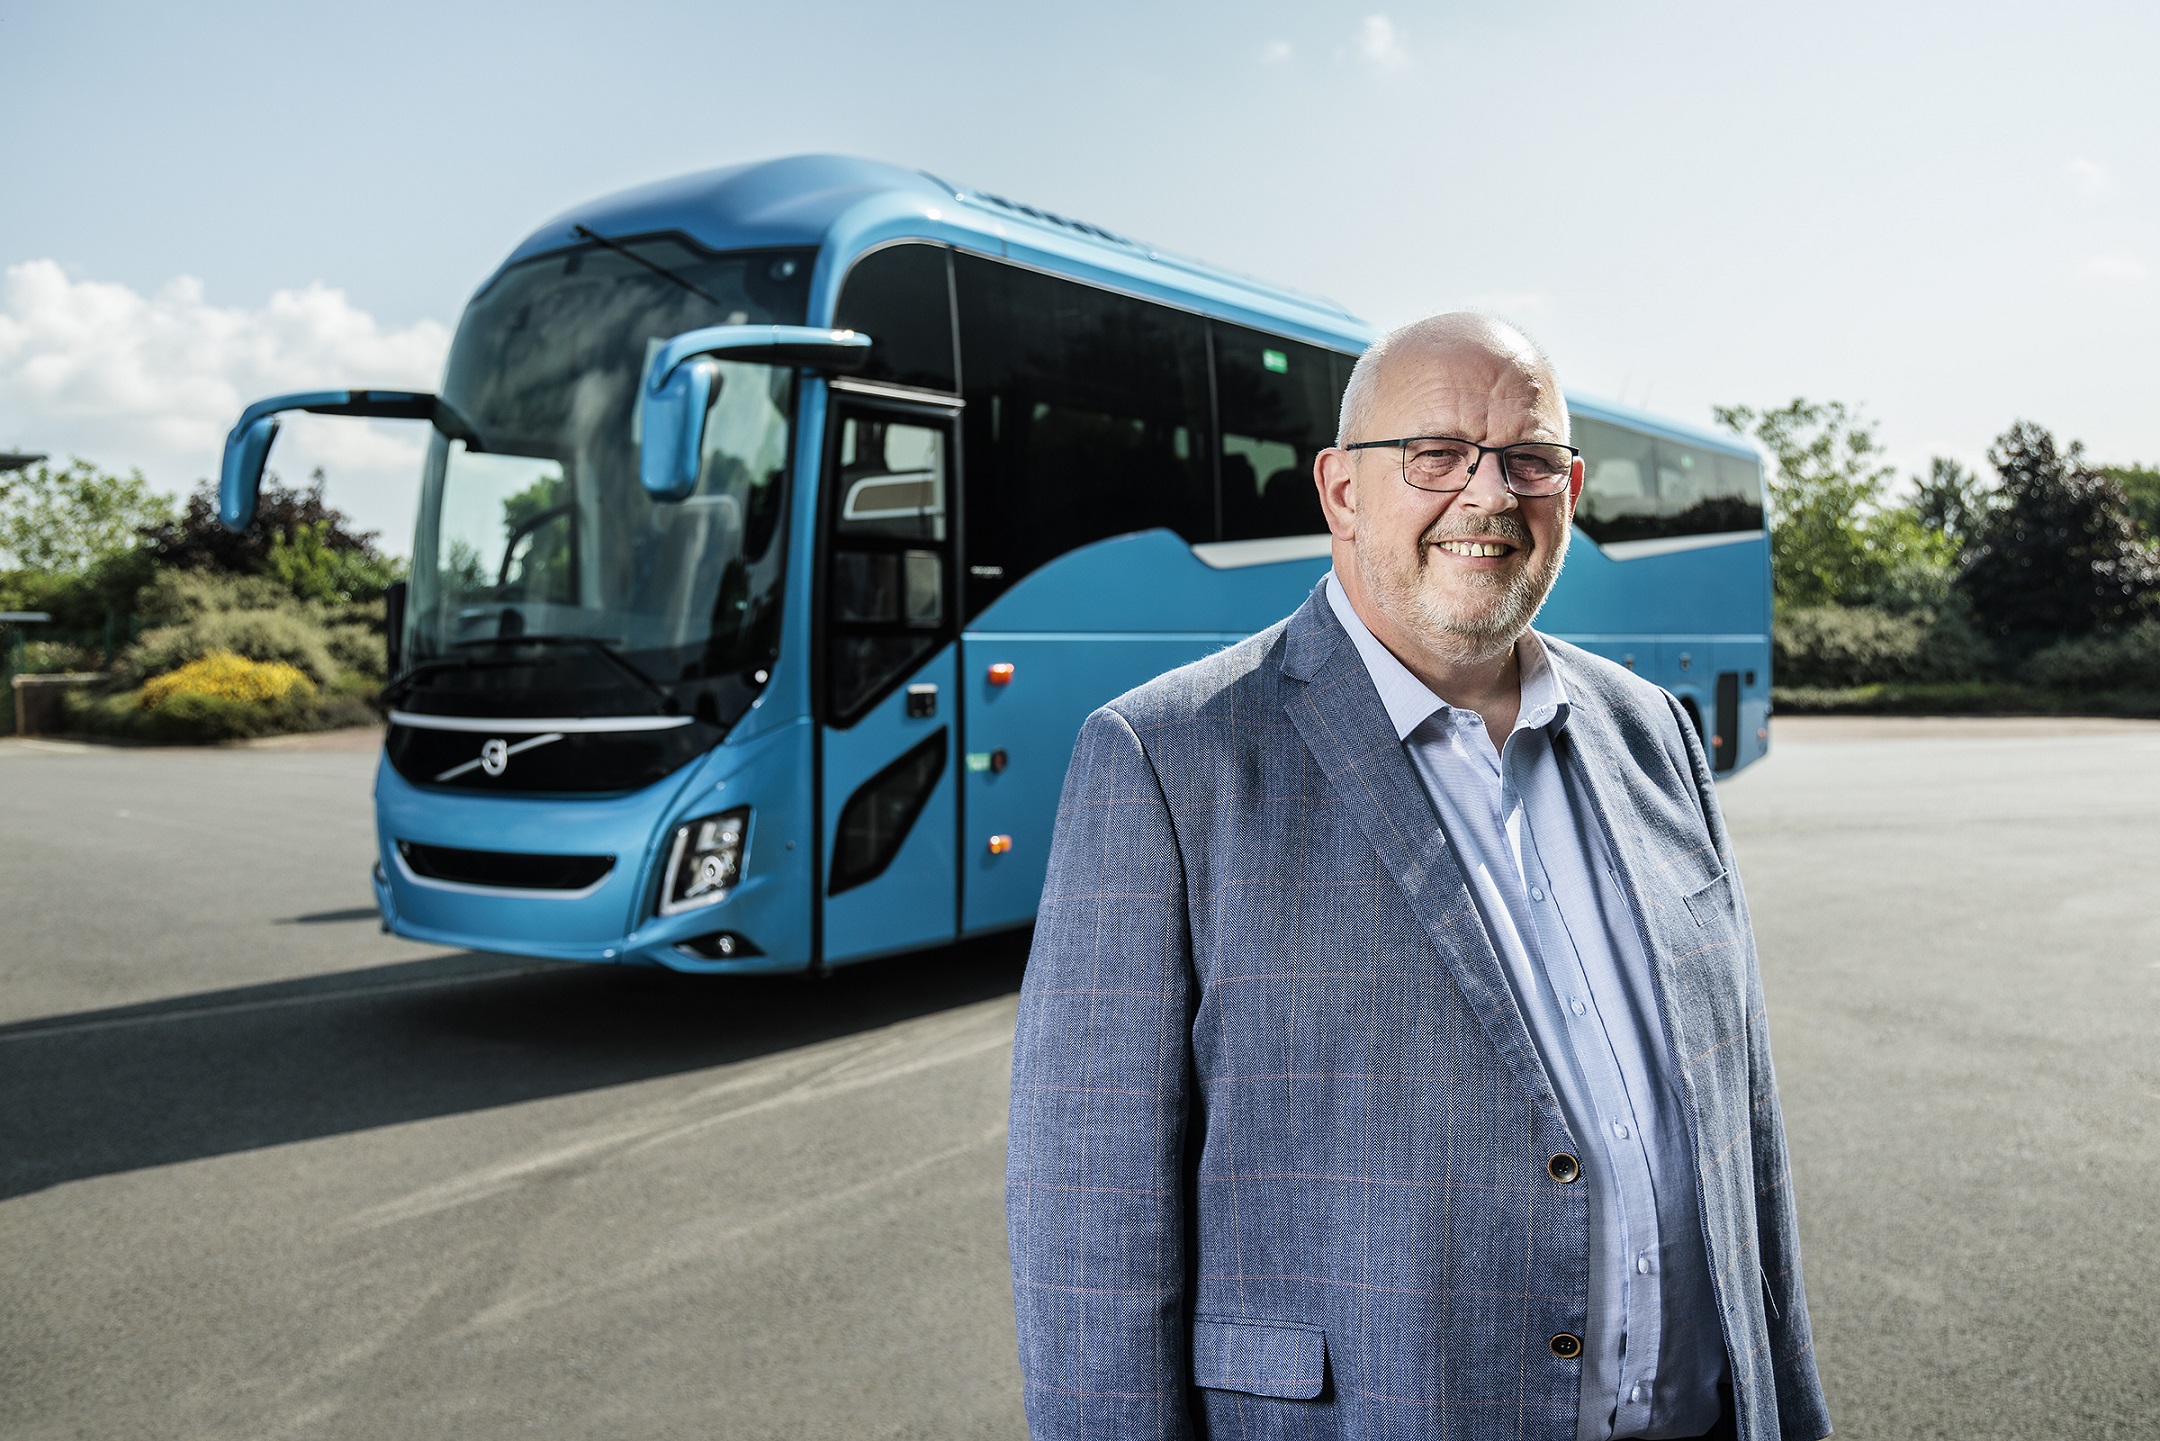 Andy Kunze hands over to Daniel Tanner at Volvo Bus